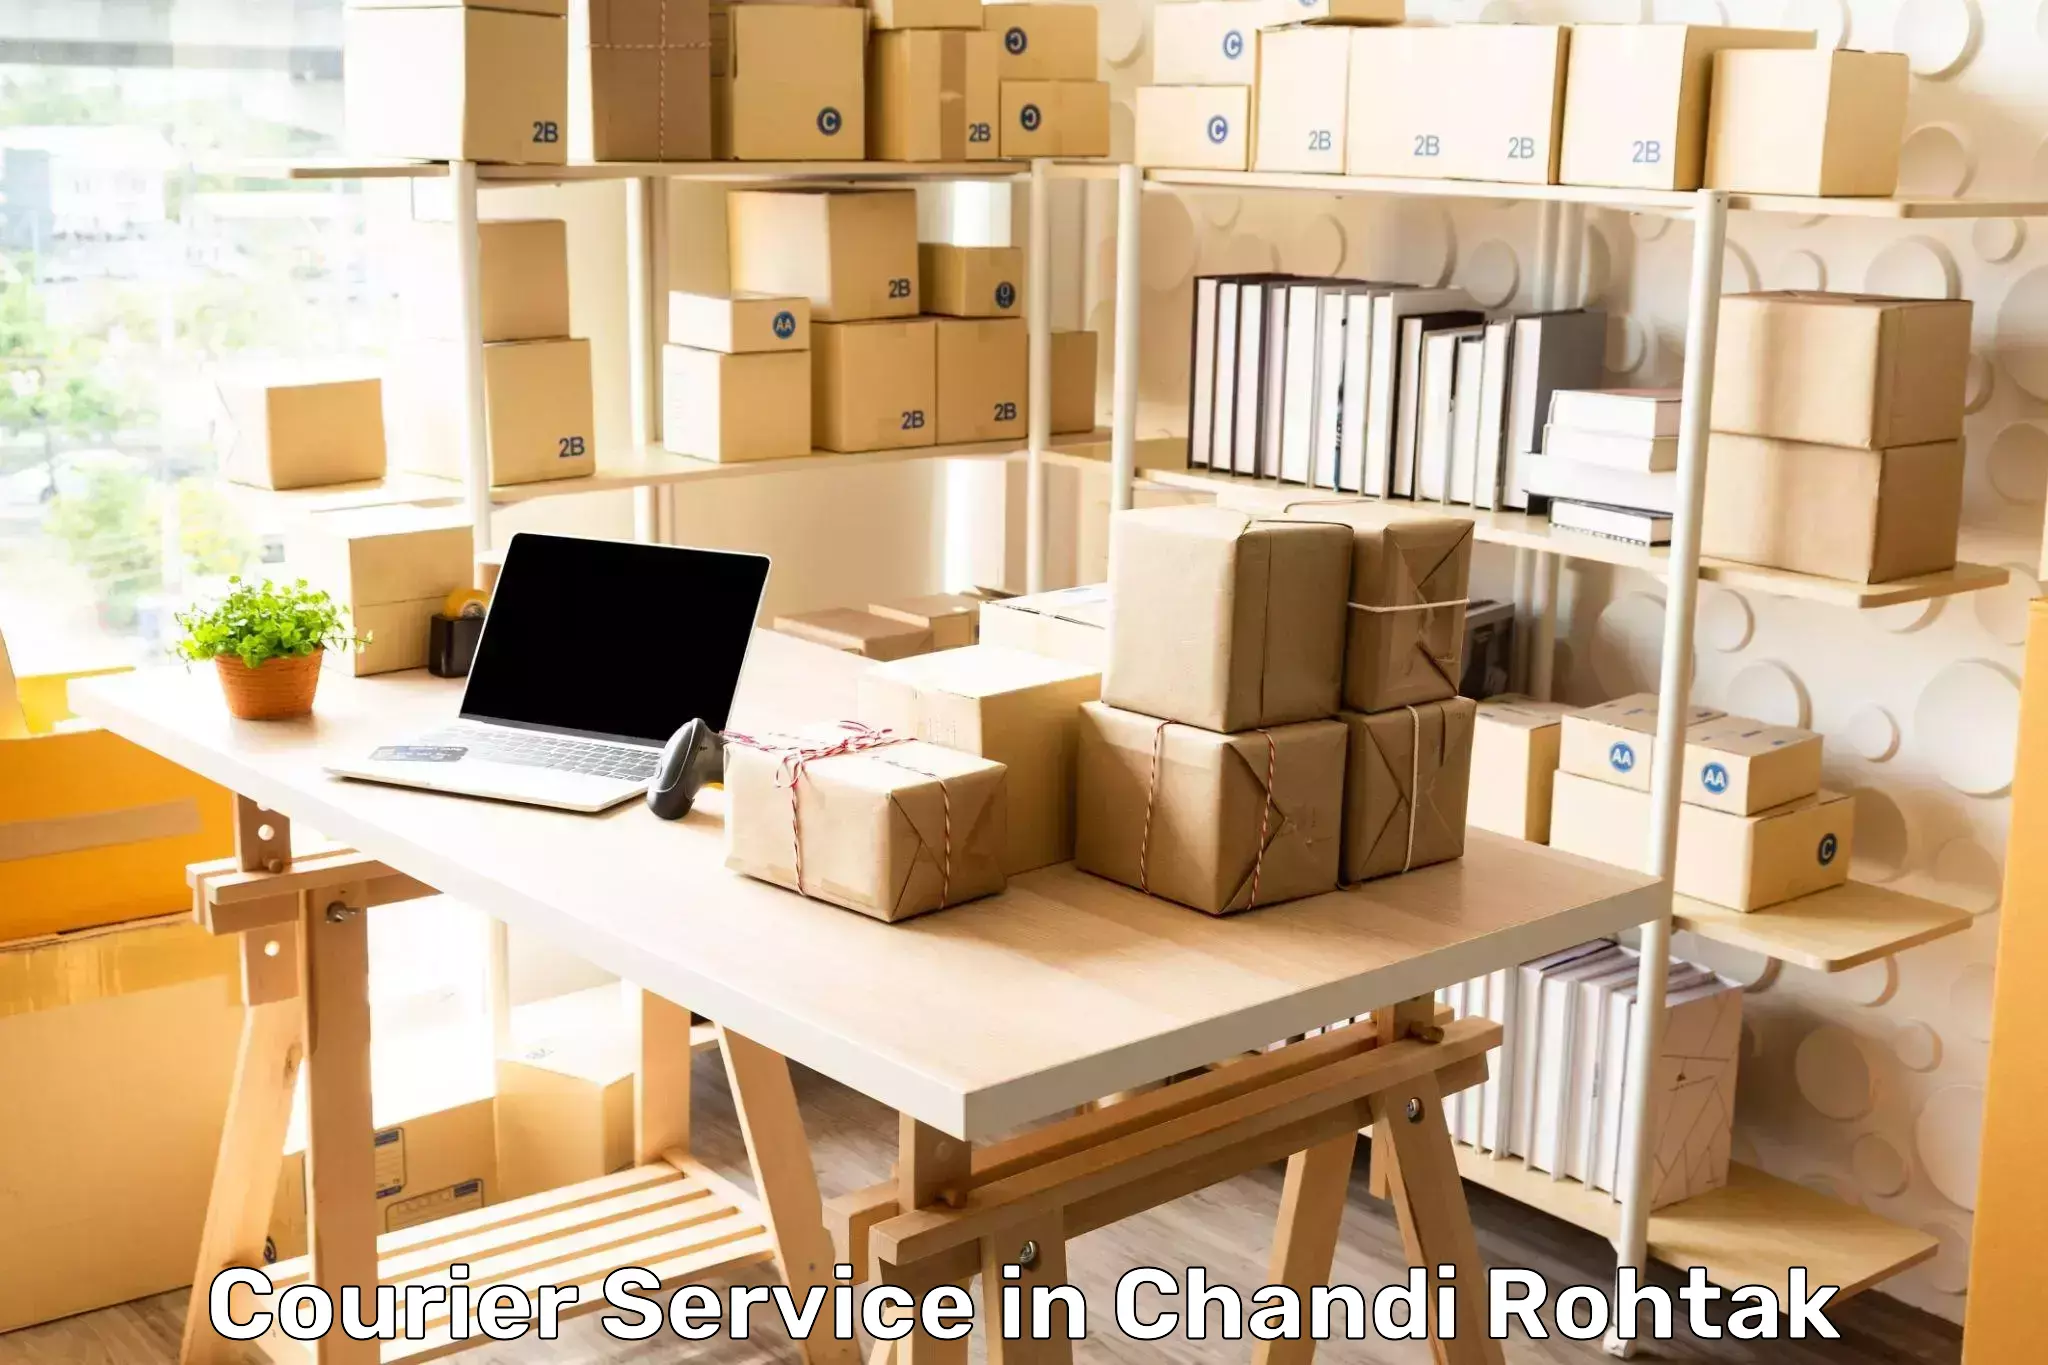 Efficient package consolidation in Chandi Rohtak